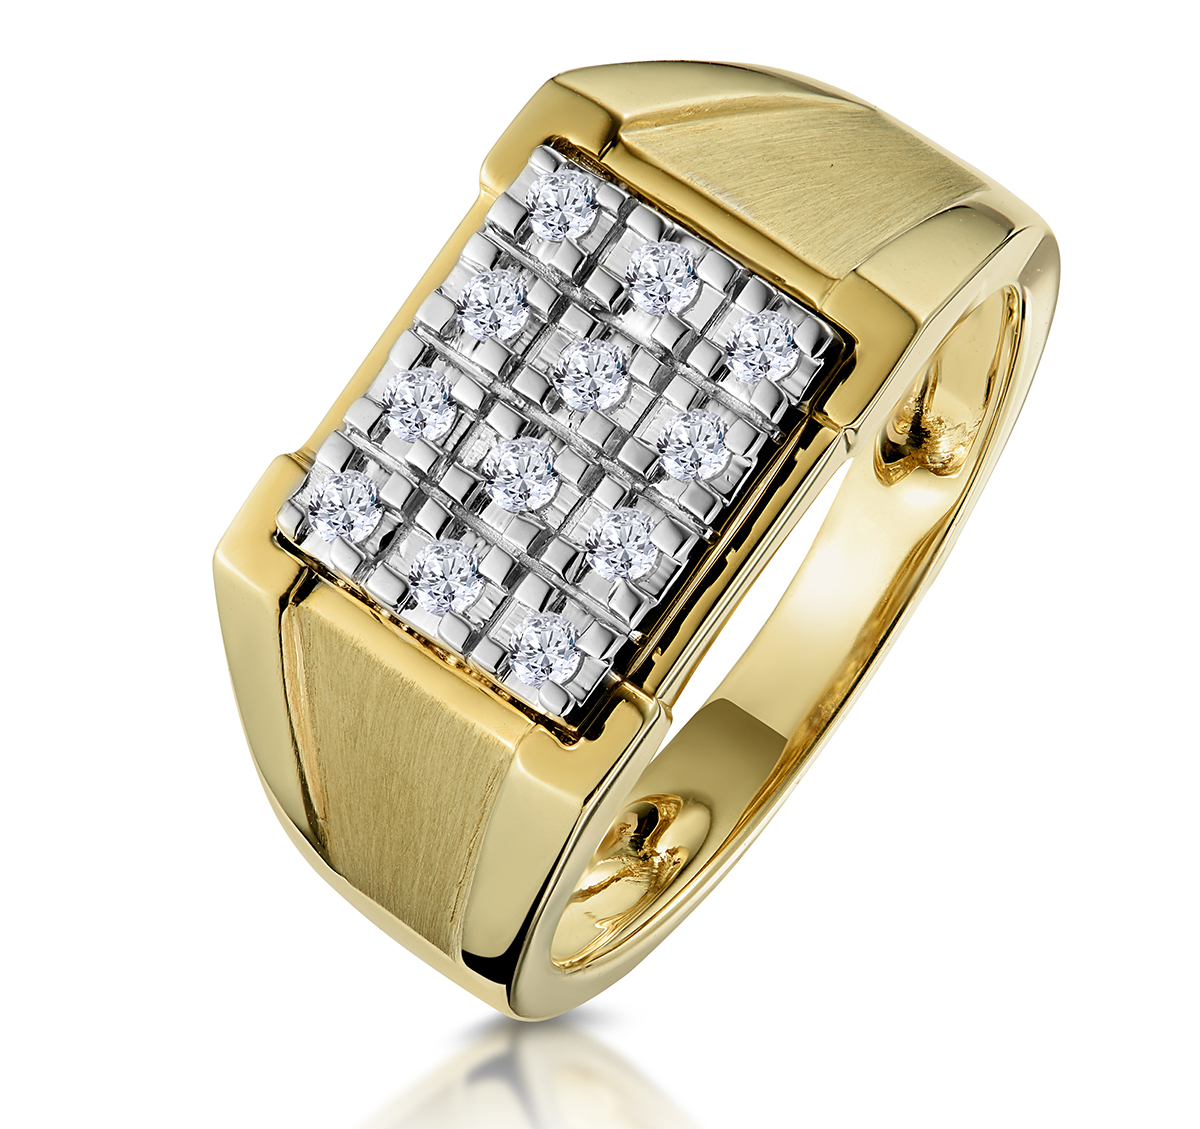 Buy quality Quad Diamond Ring in Channel Setting for Men in Pune